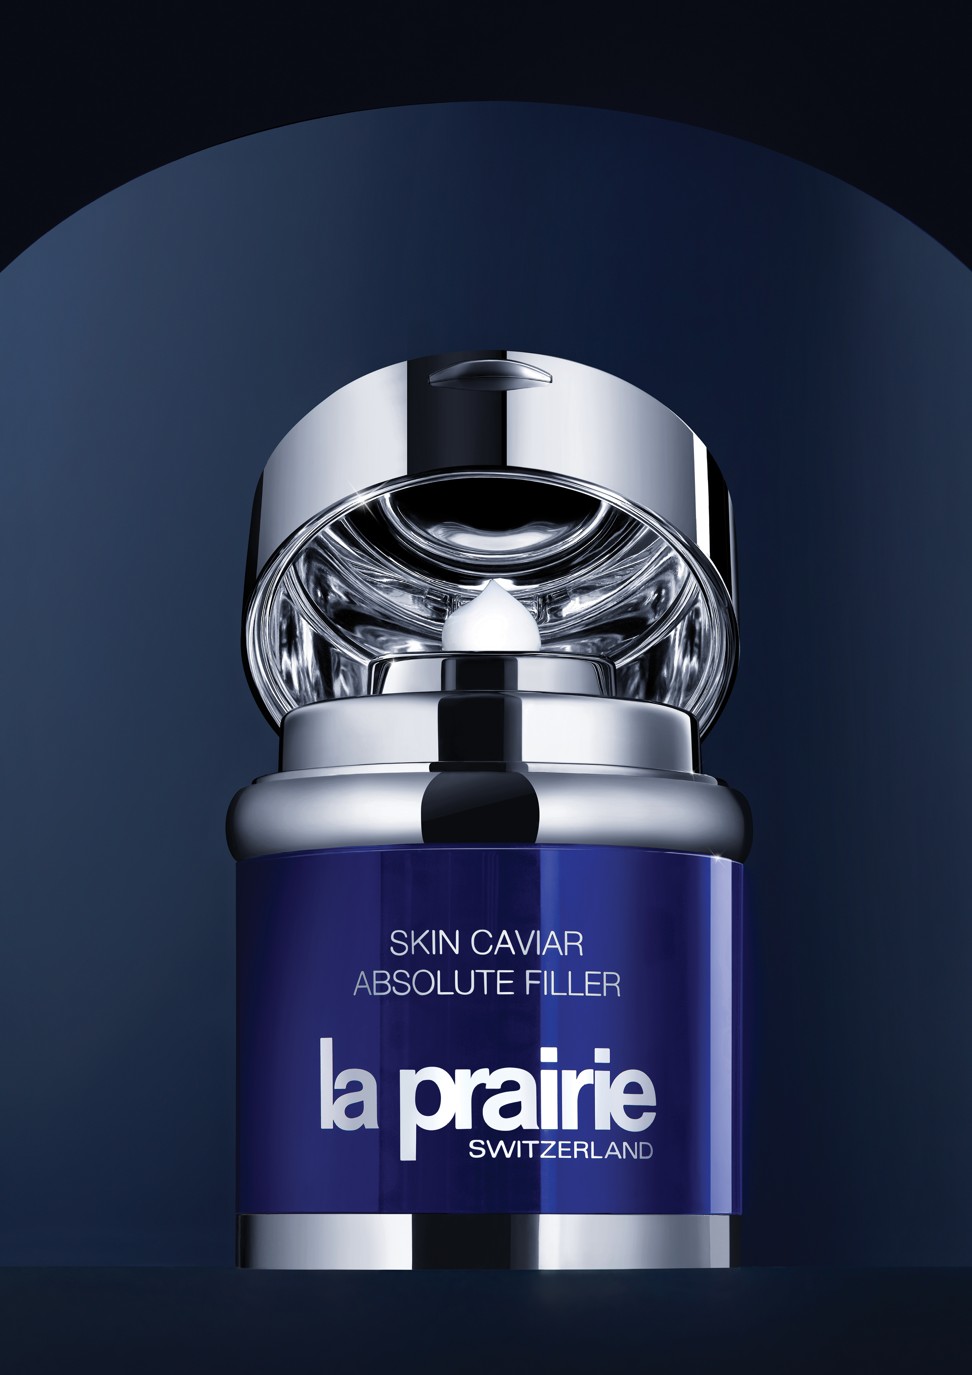 The new Skin Caviar Absolute Filler features the brand’s Caviar Absolute formula, which contains highly concentrated caviar oil and proteins.